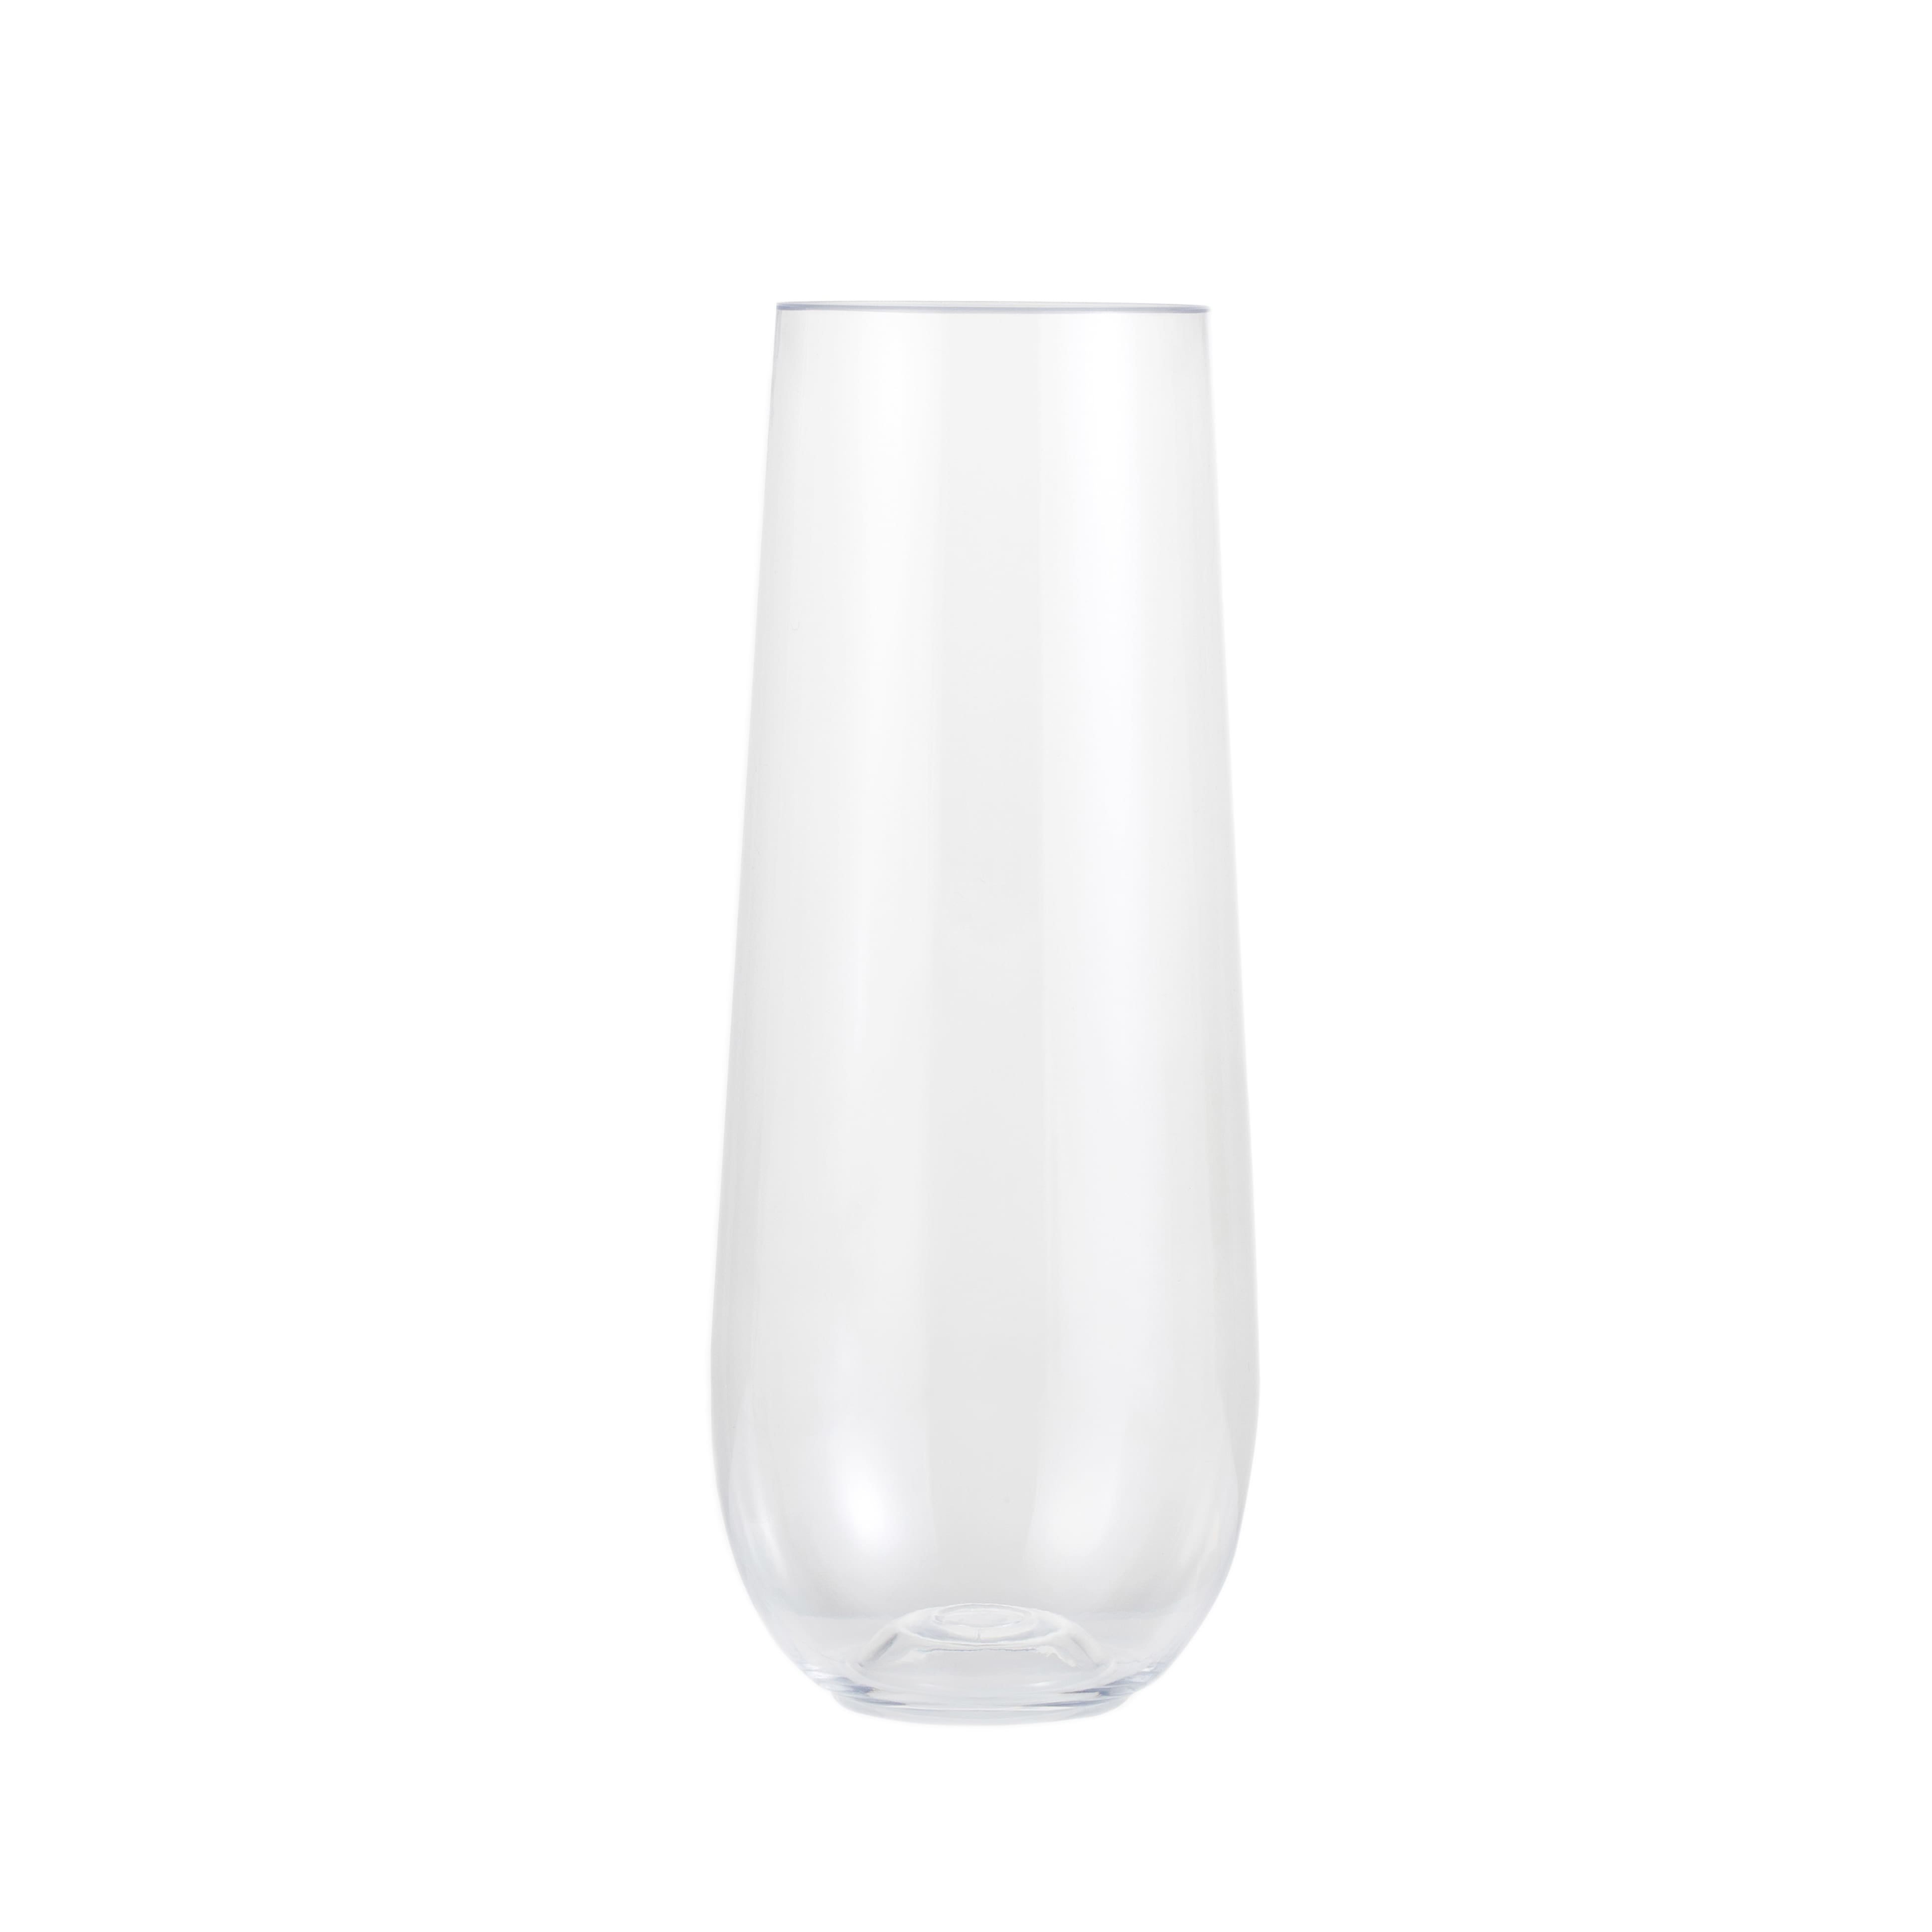 9oz. Clear Plastic Stemless Champagne Flutes by Celebrate It™, 8ct.